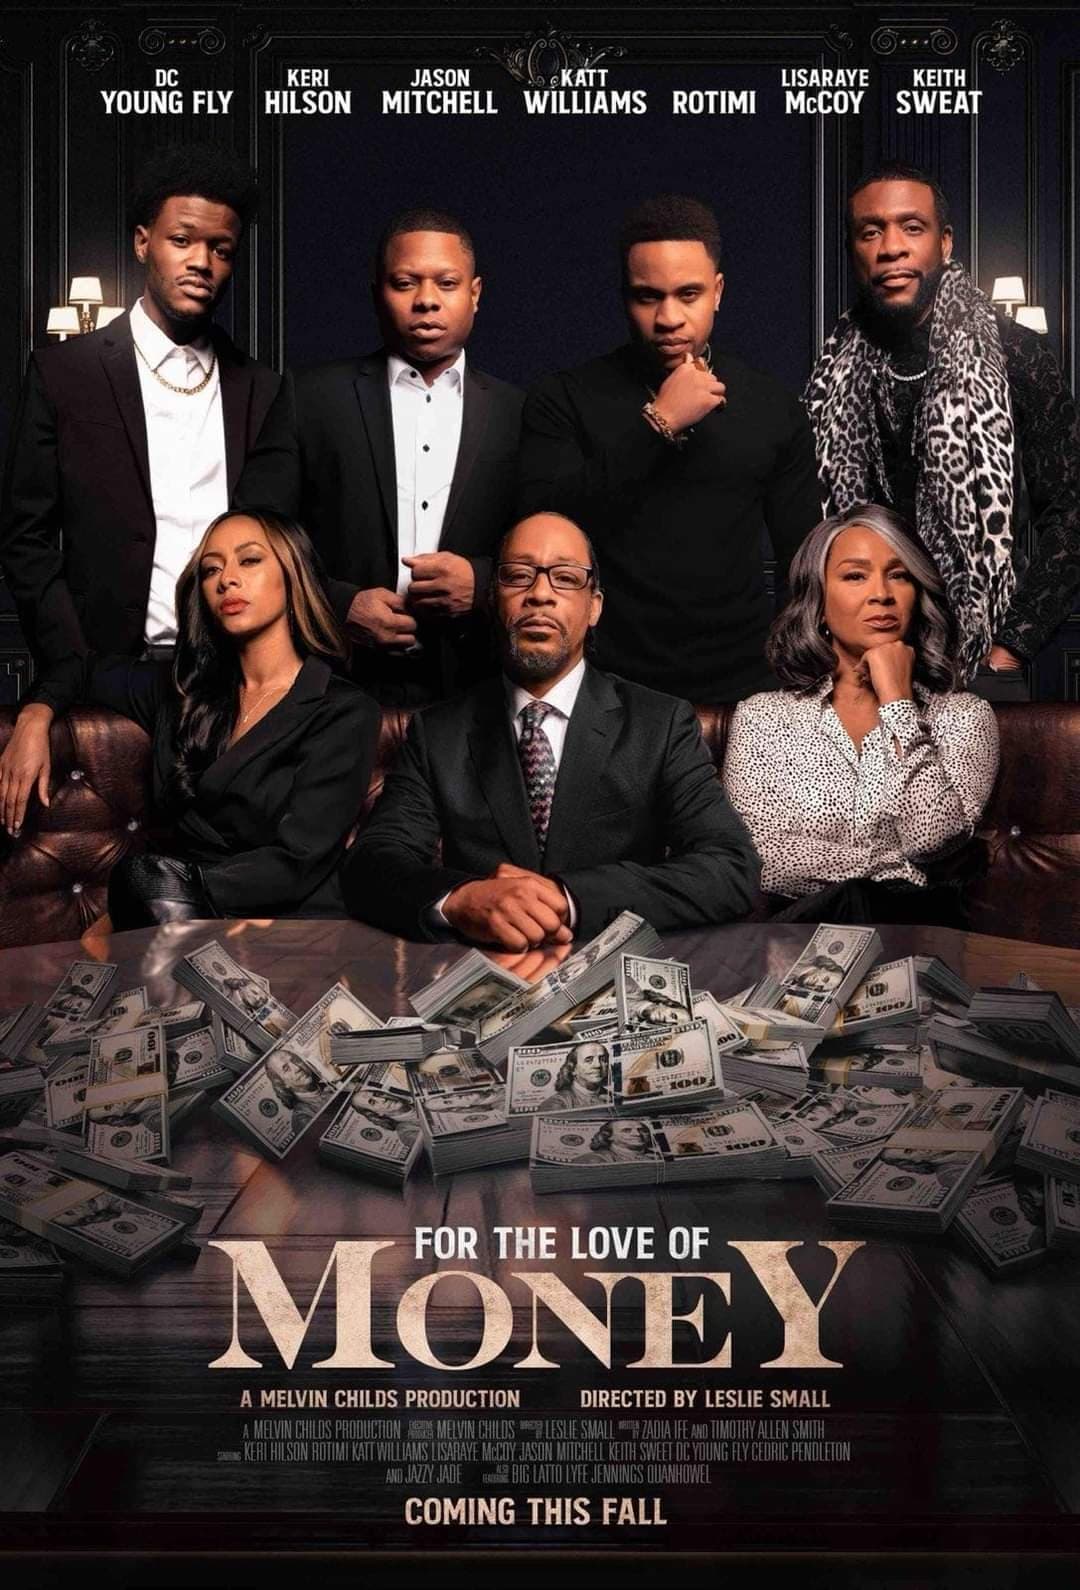 For the Love of Money film